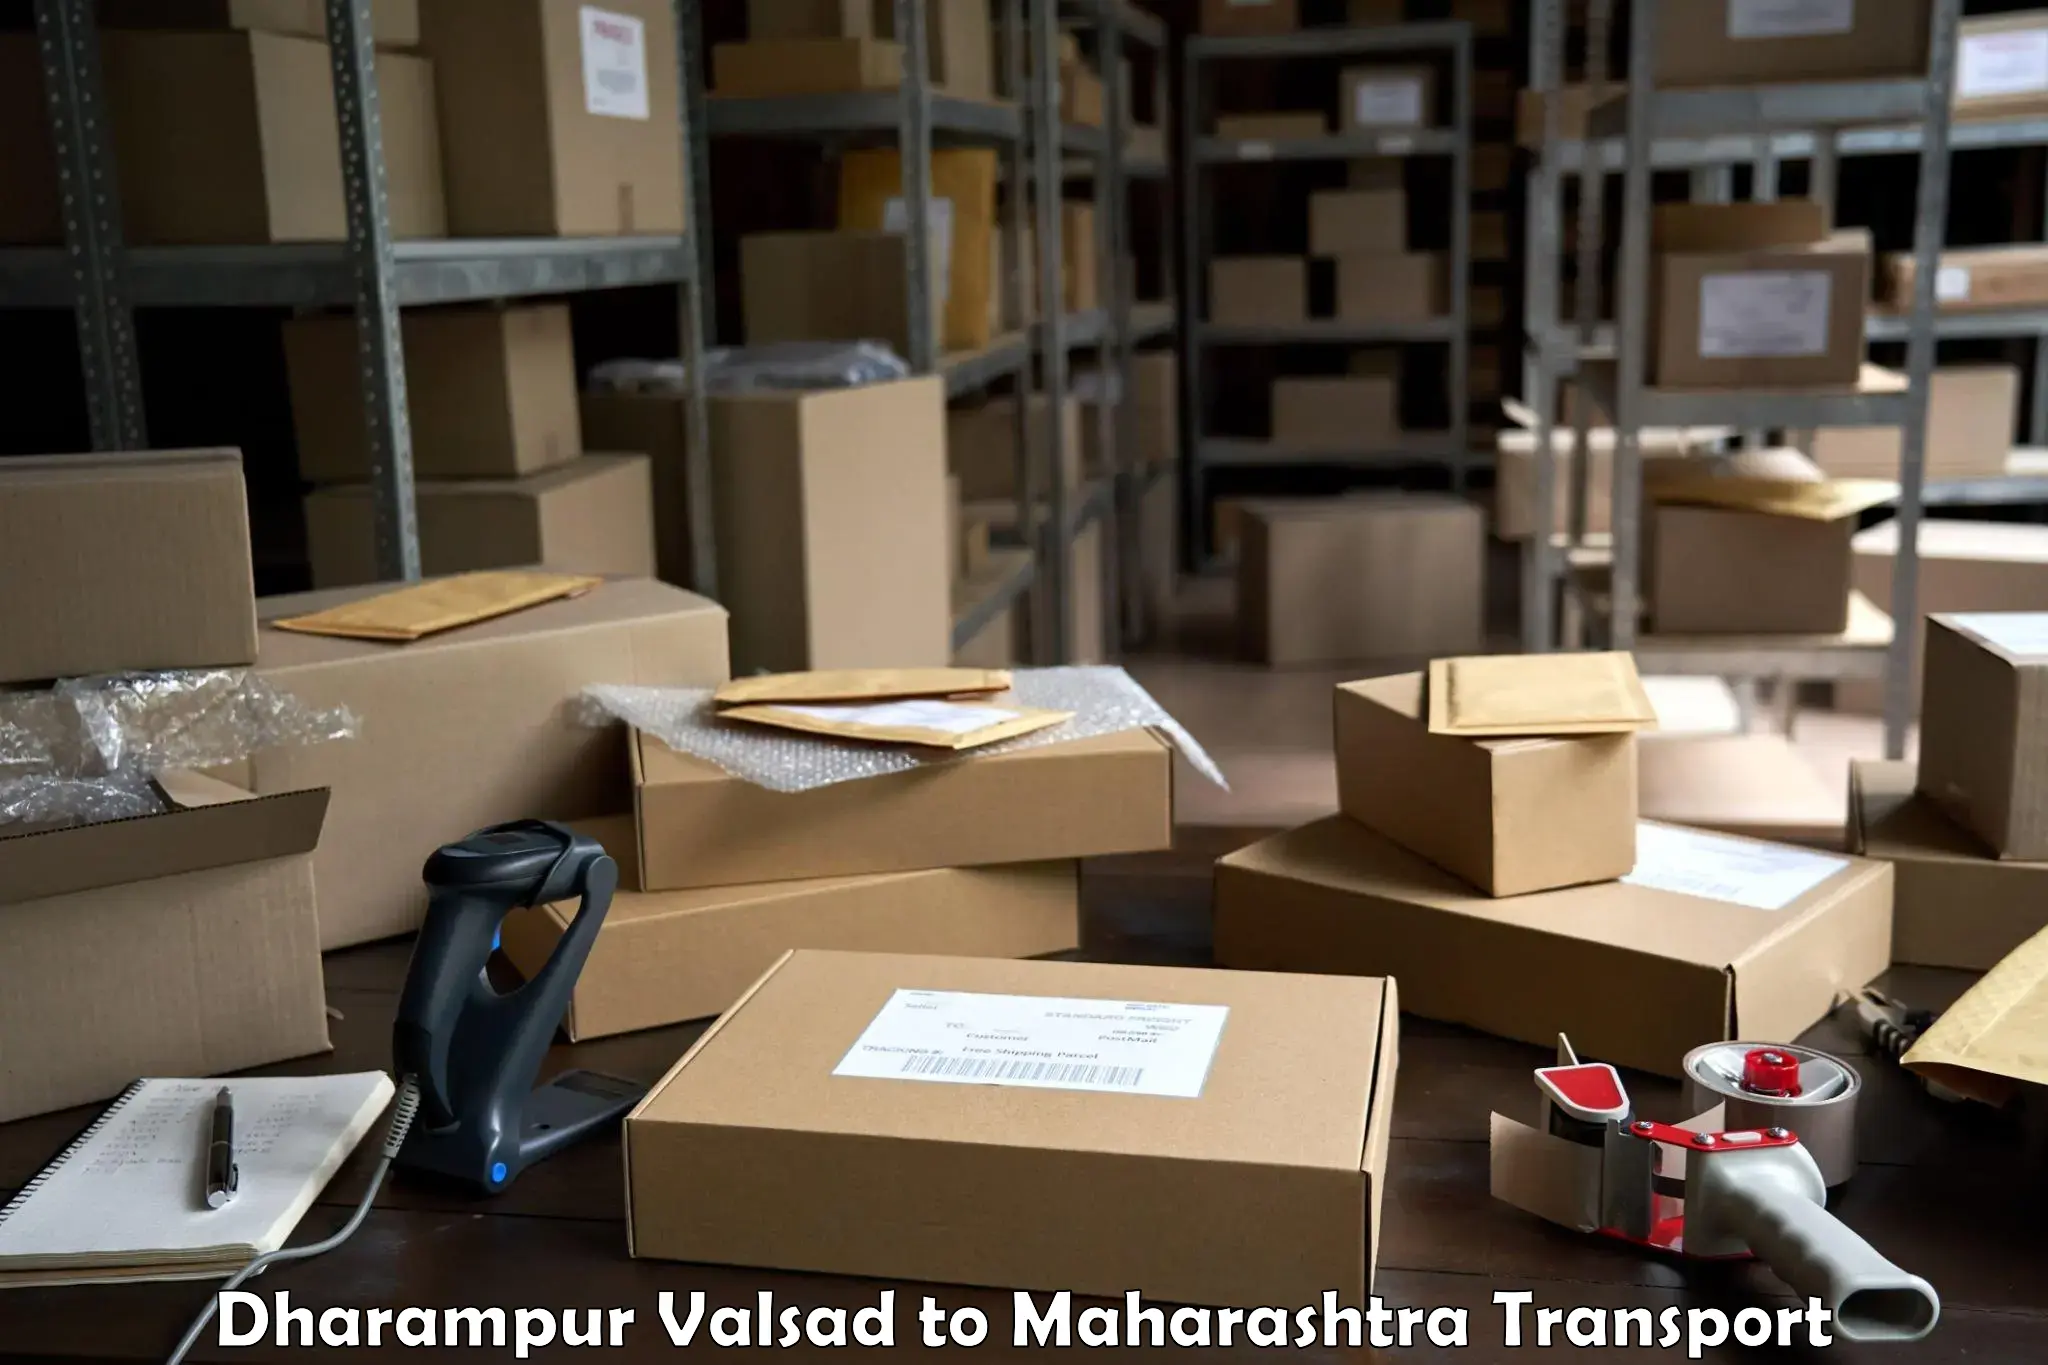 Road transport online services Dharampur Valsad to Shirpur